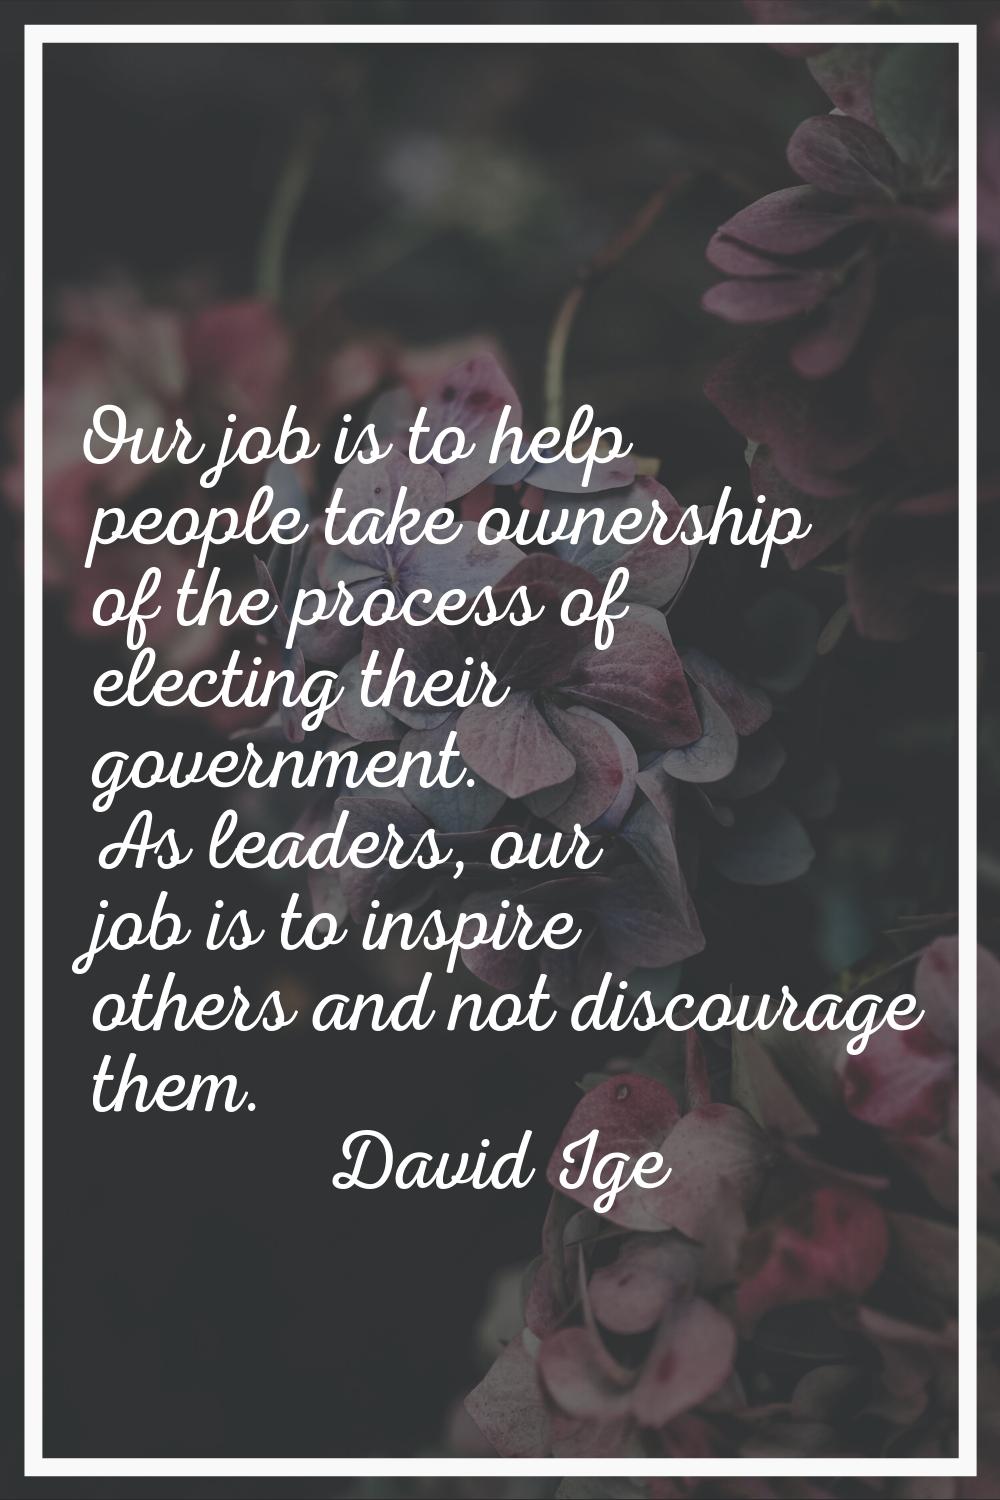 Our job is to help people take ownership of the process of electing their government. As leaders, o